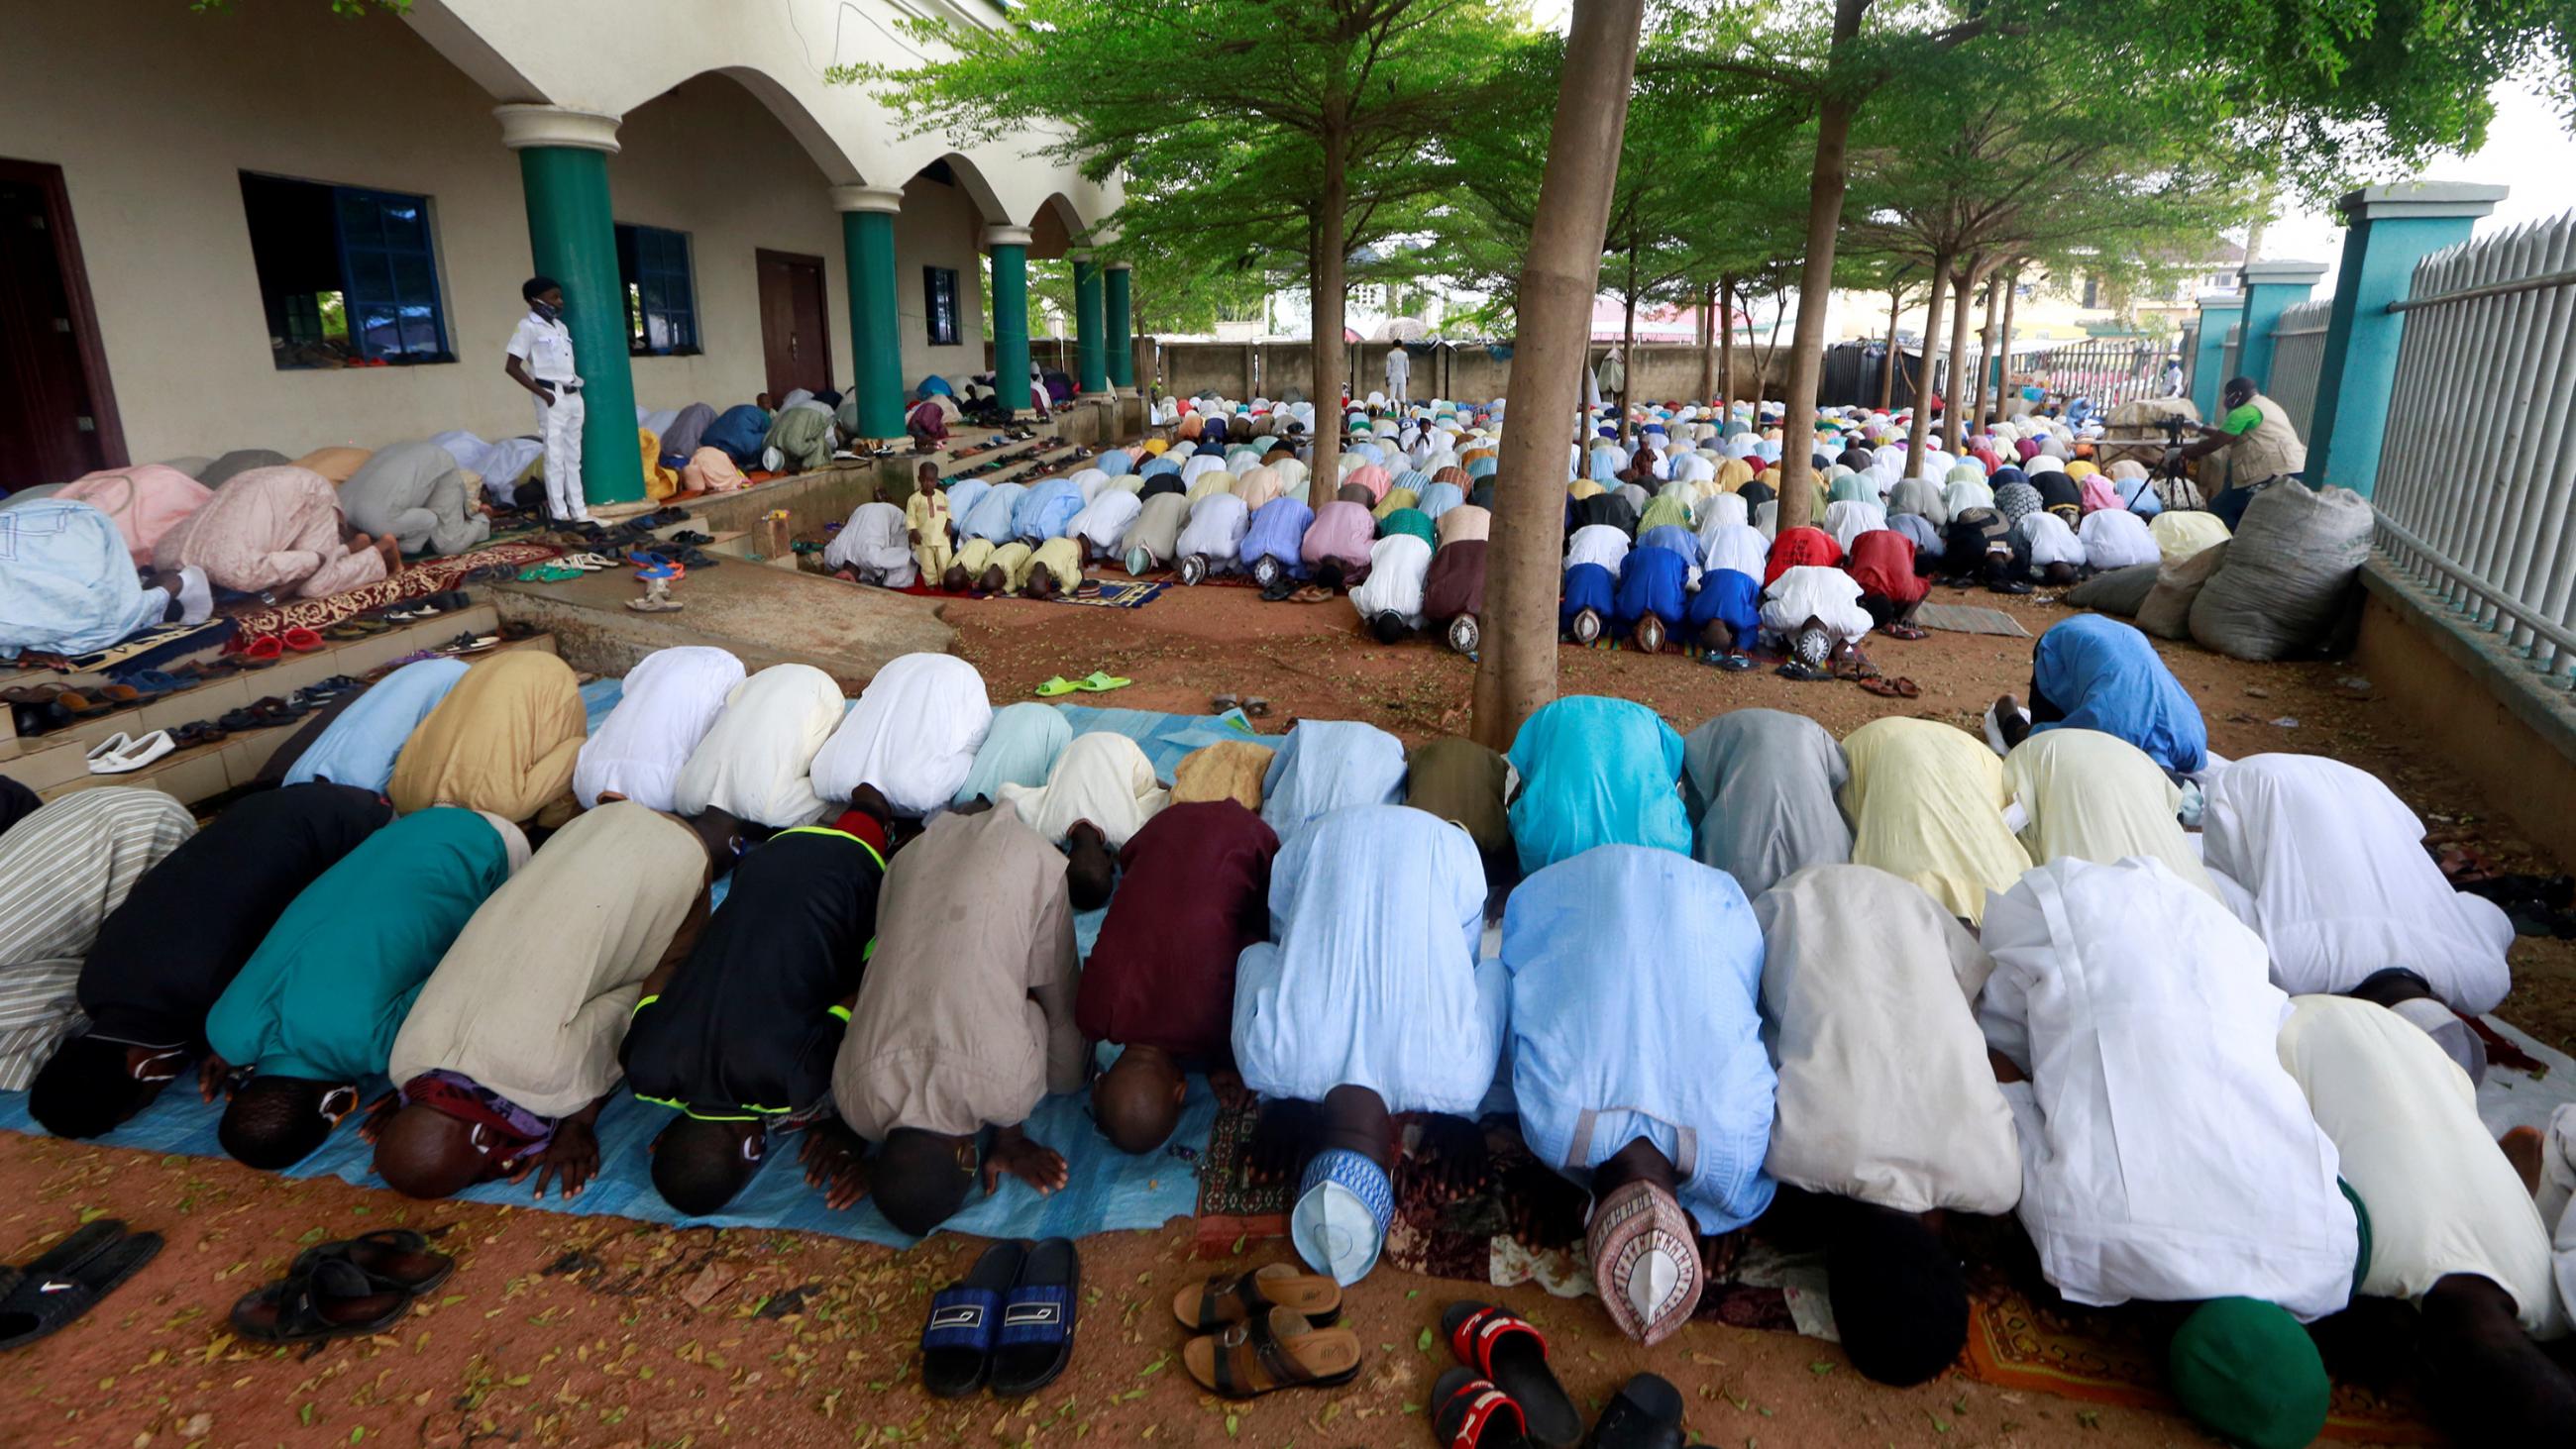 The photo shows a large gathering of people in an outdoor area praying, on their knees and prostrate on the ground. 